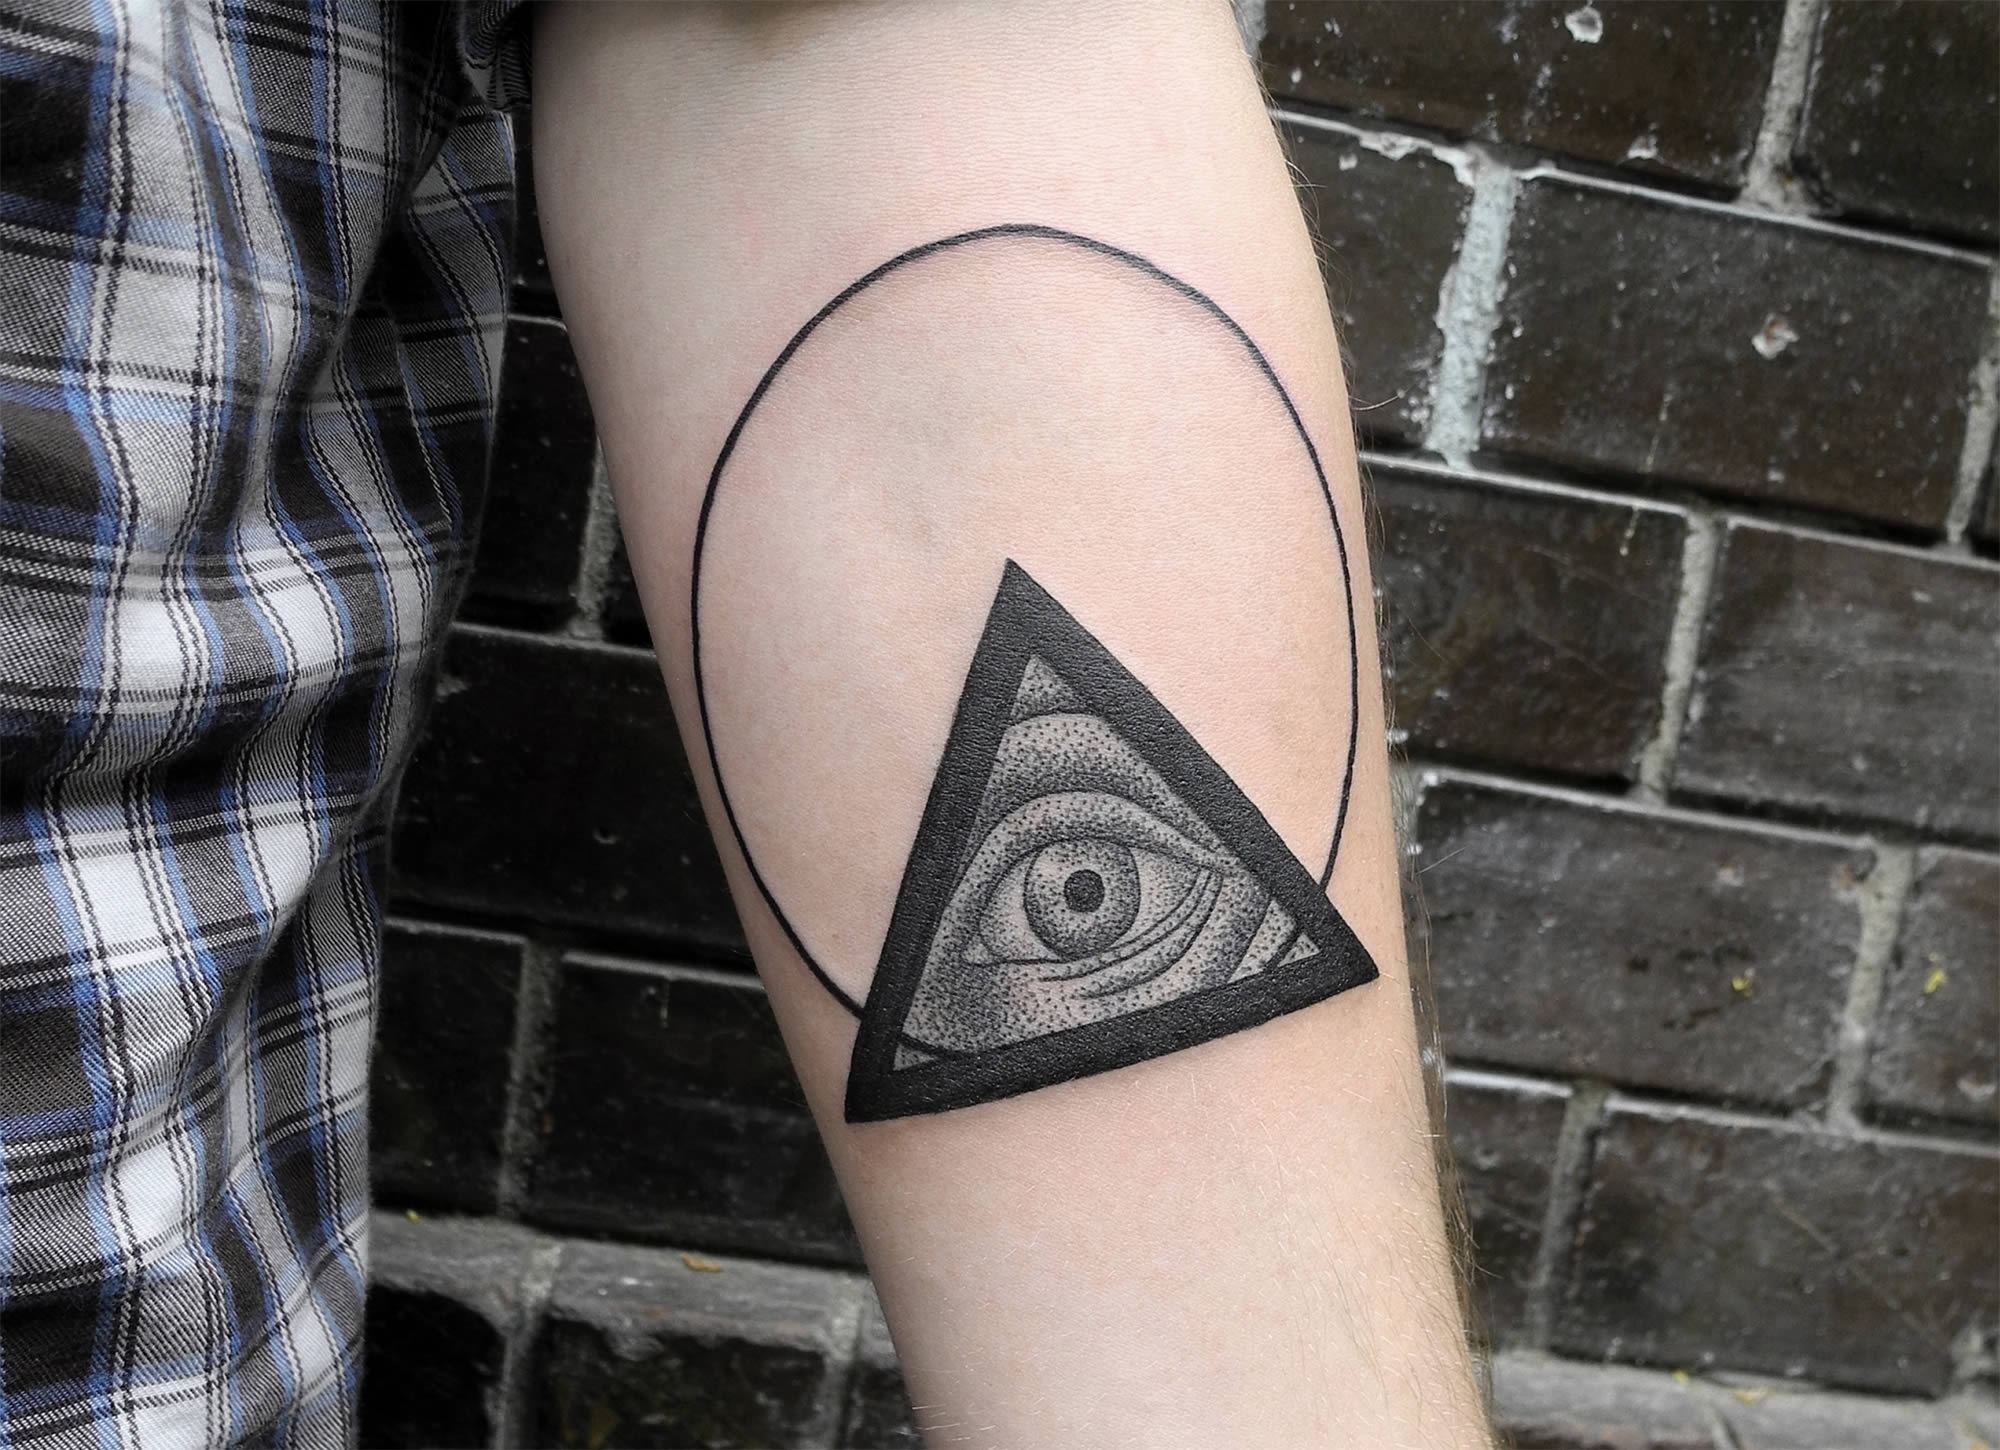 50+ All Seeing Eye Tattoos Ideas and Designs and their Meanings that are  Not Illuminati-Related - Tats 'n' Rings